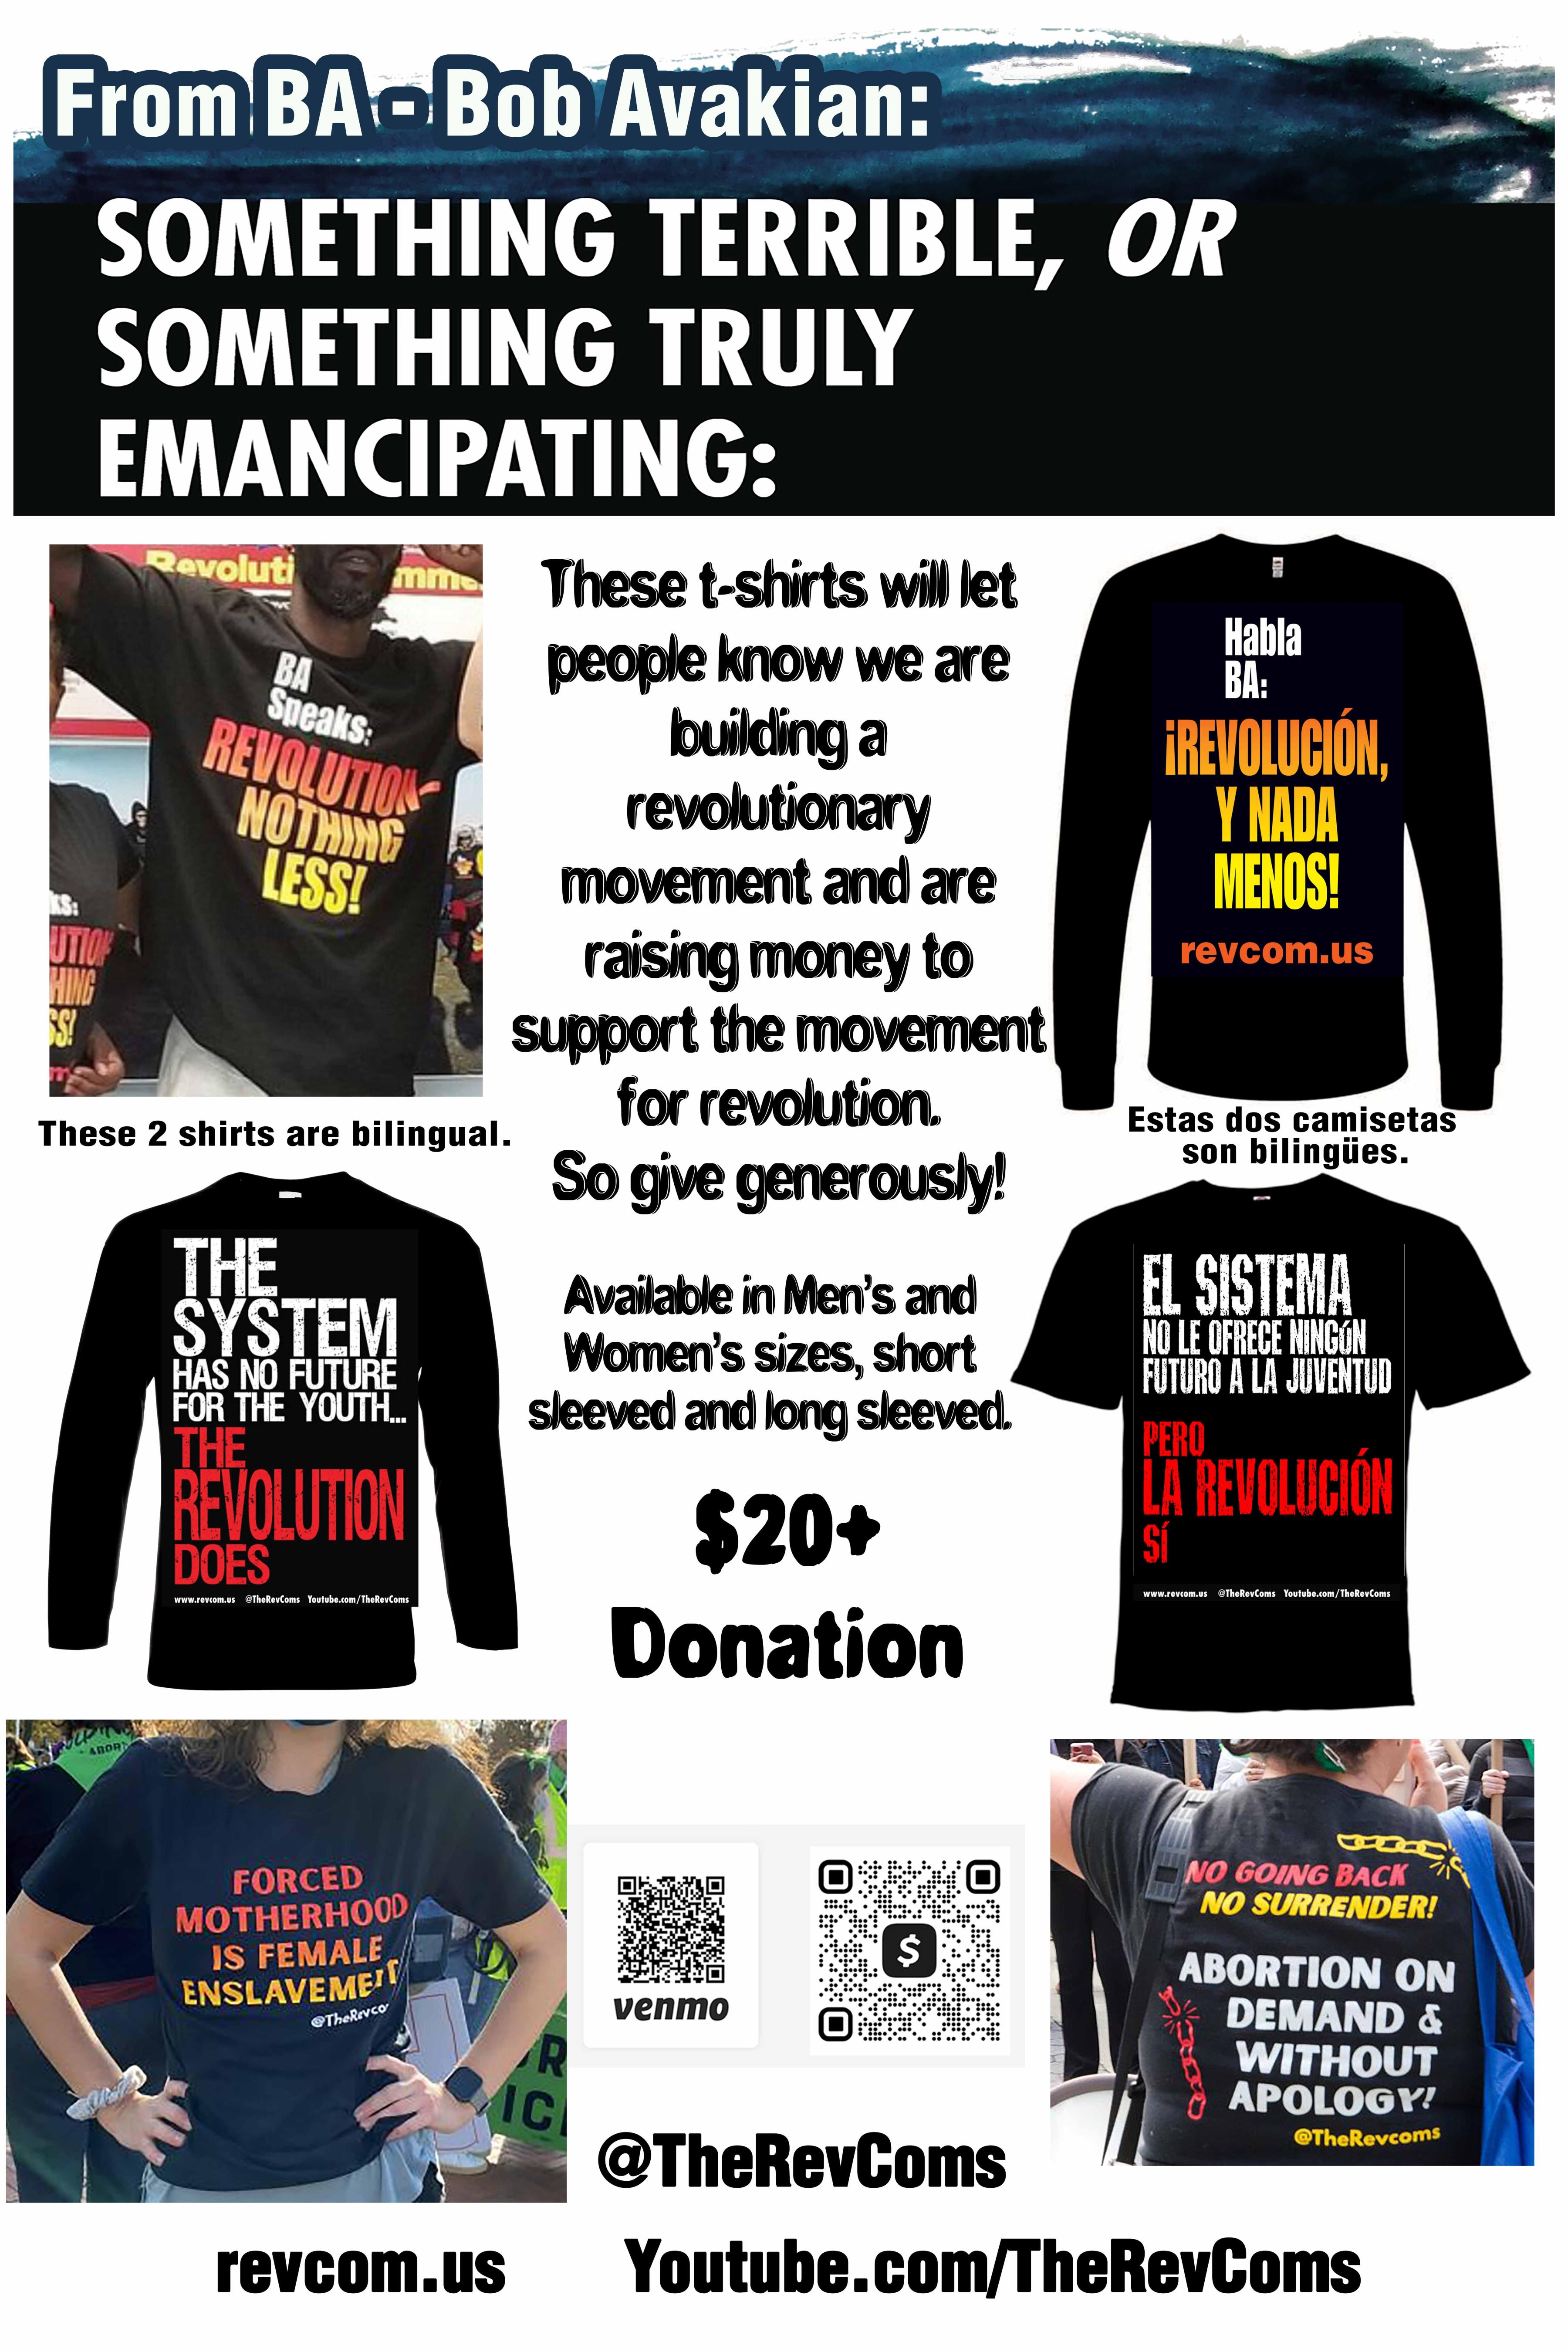 These t-shirts will let people know we are building a revolutionary movement and raising money